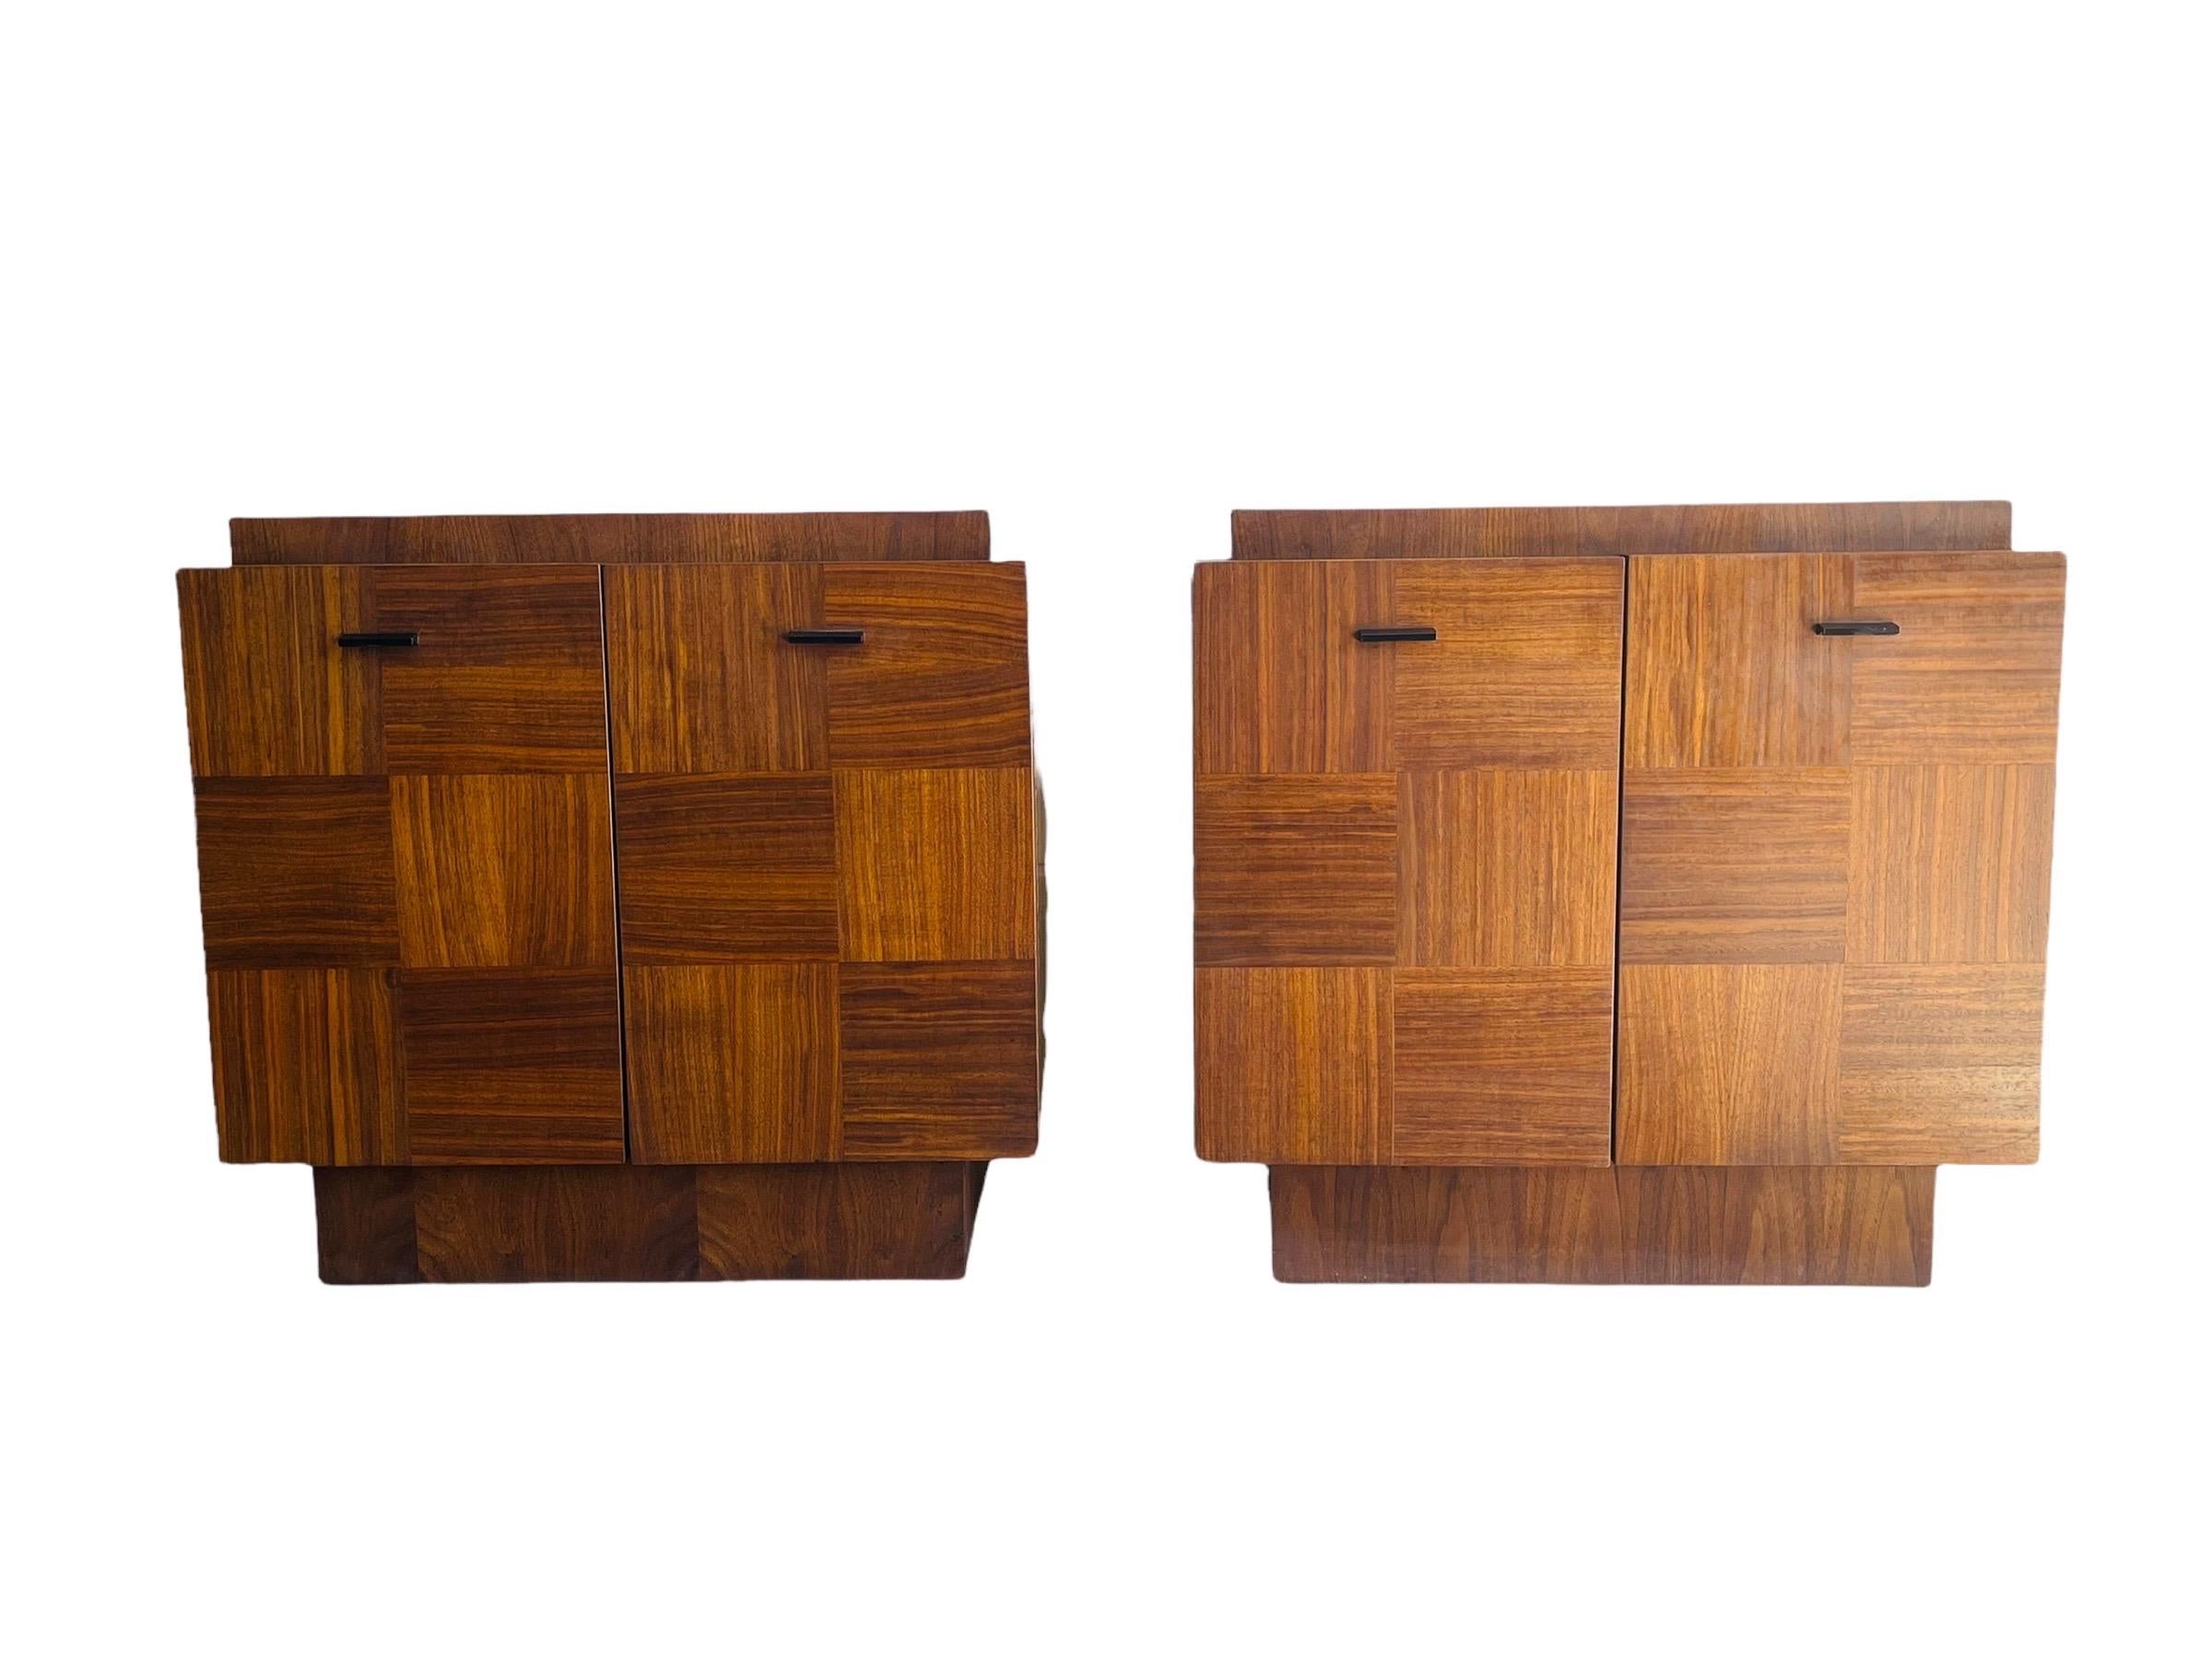 Pair of Mid-Century Modern walnut nightstands in style of Paul Evans by Tobago Furniture company. These nightstands are in good vintage condition with normal wear consistent with age and use. 

Measures: W 26” x D 17.25” x H 25”.